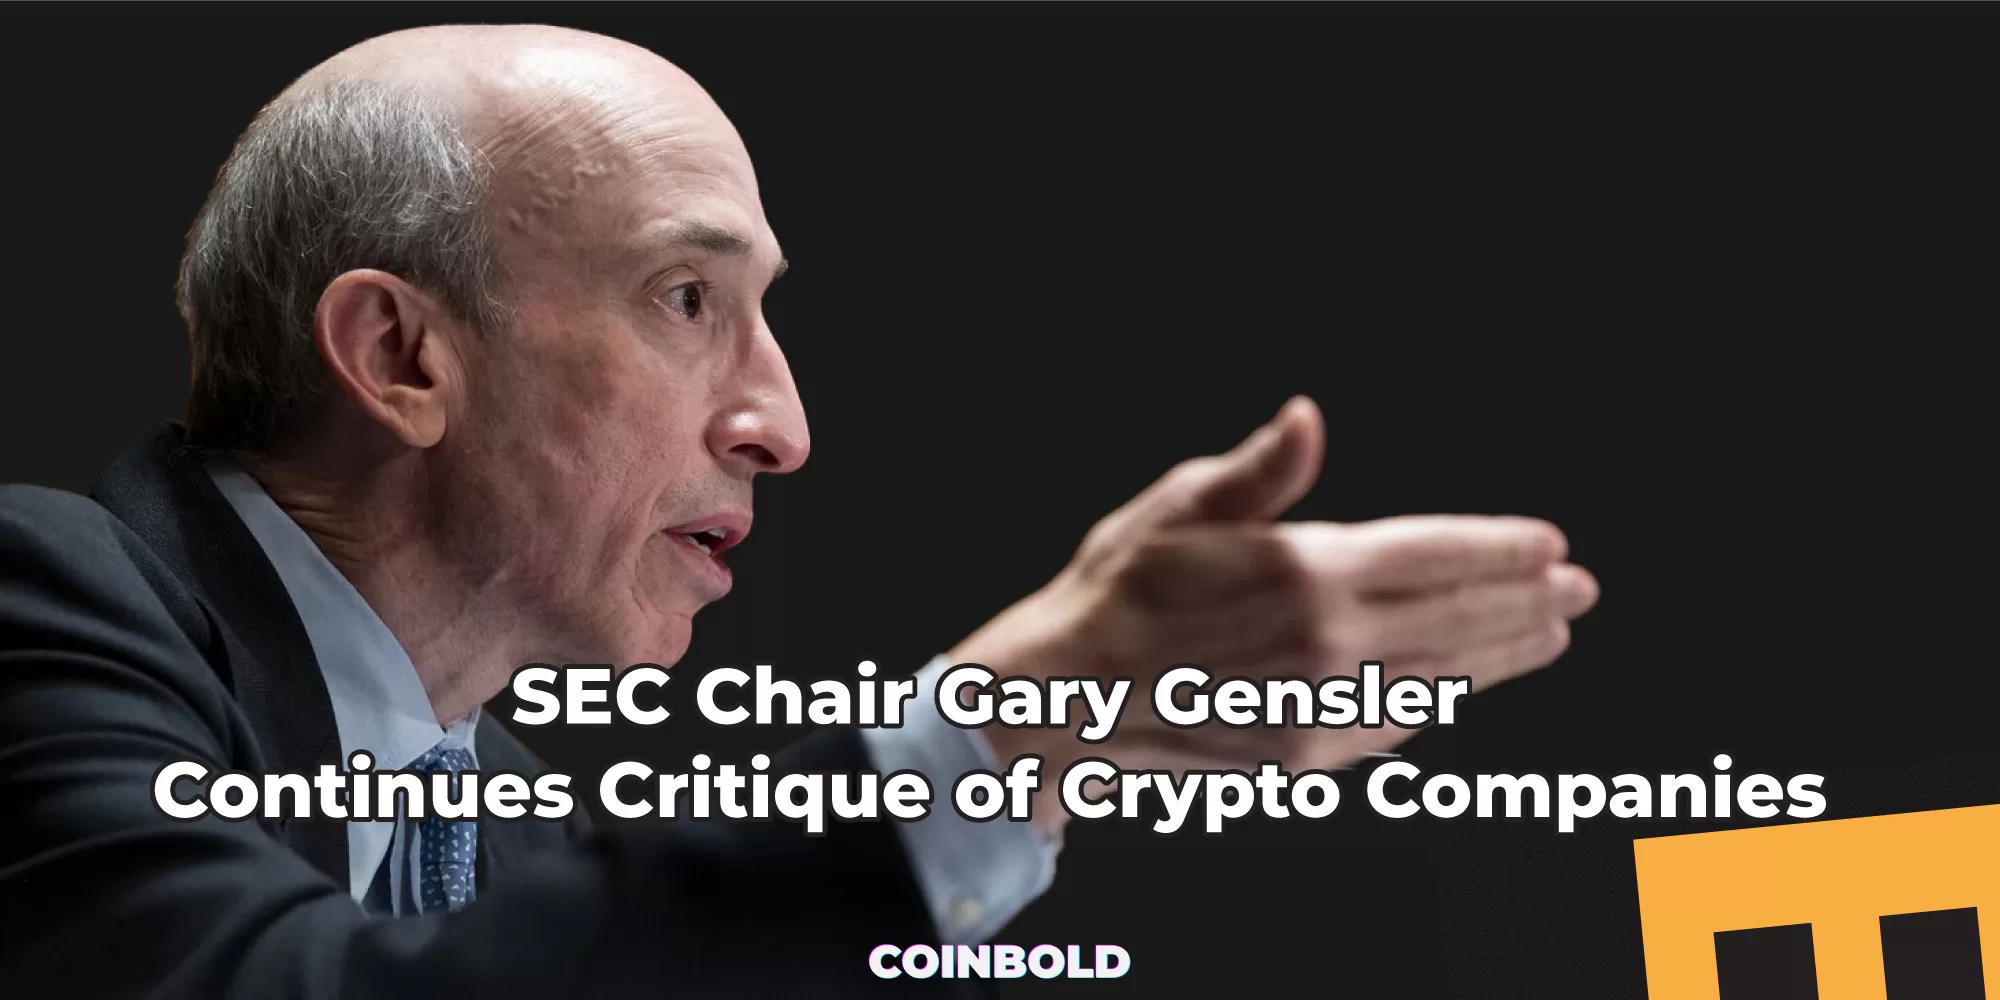 SEC Chair Gary Gensler Continues Critique of Crypto Companies